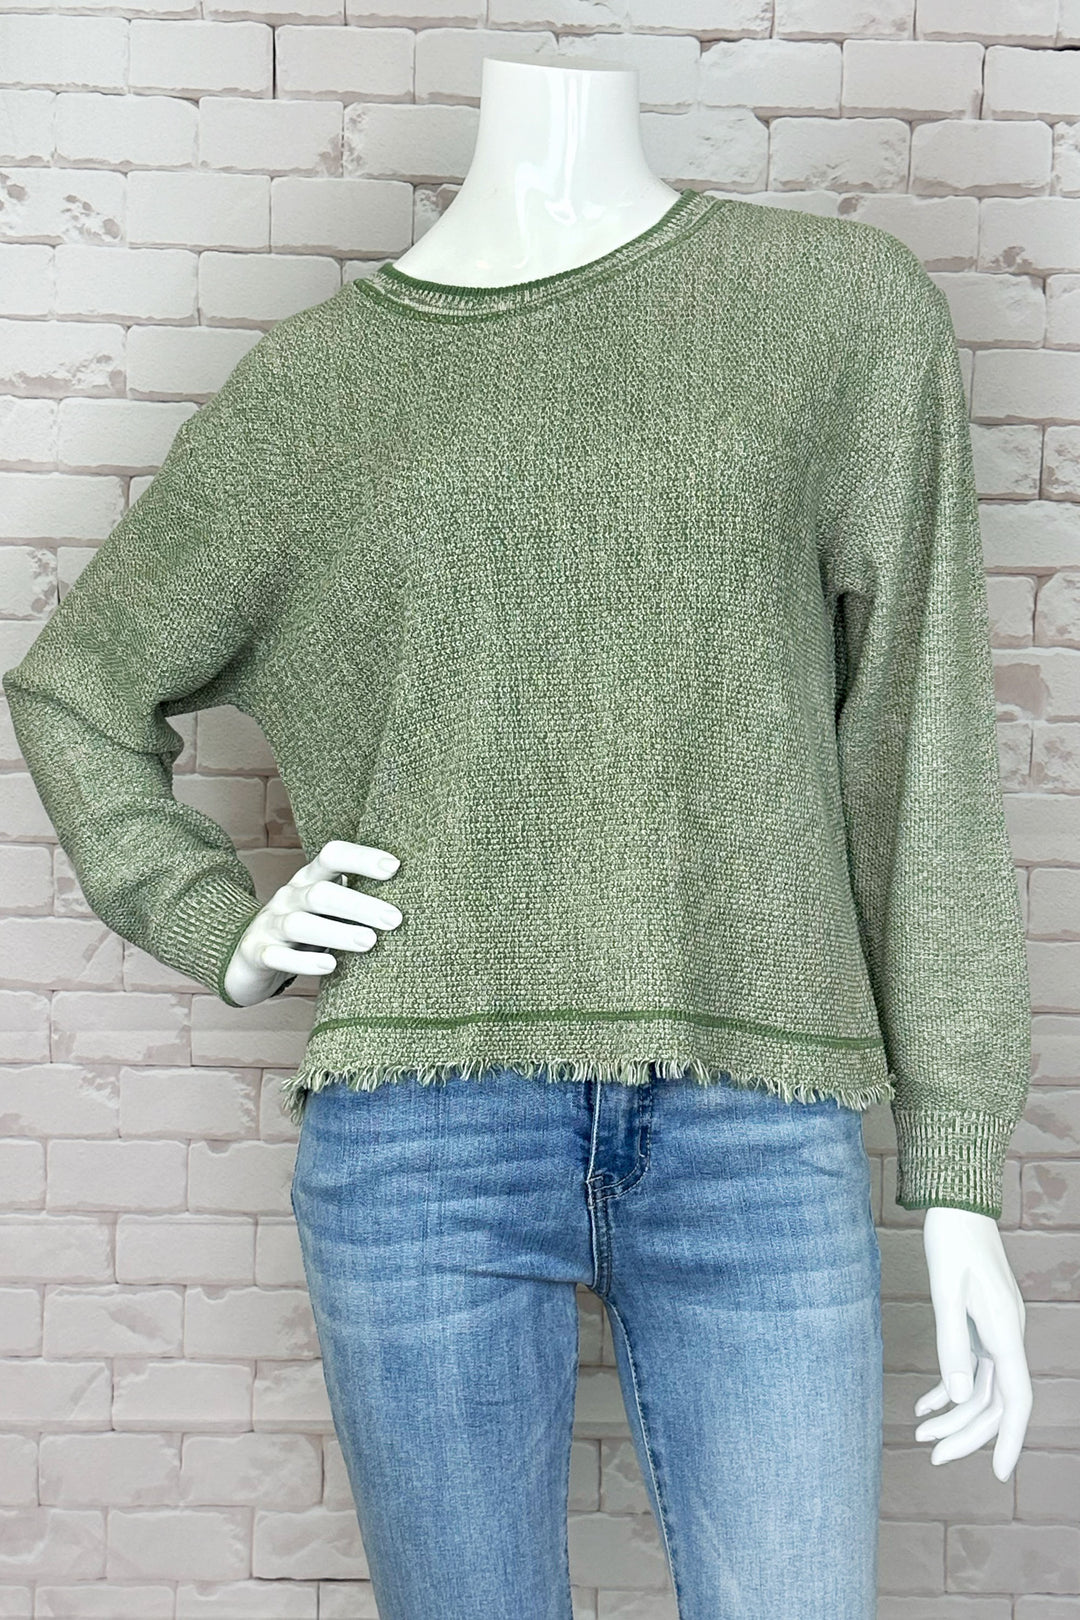 Made with a soft and lightweight knit fabric, this piece is perfect for any upcoming casual occasion. 